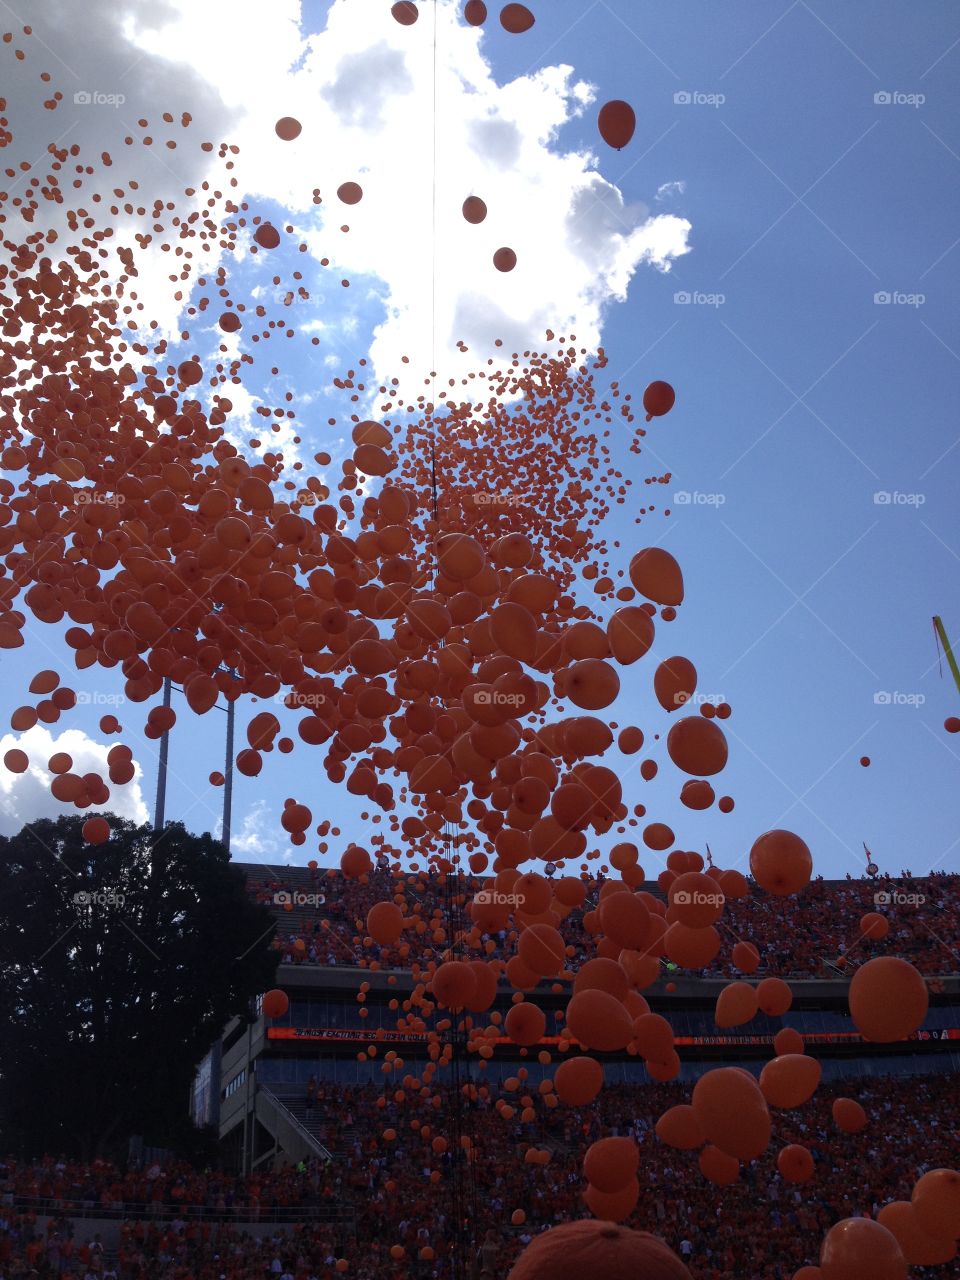 Orange balloons floating into the sky